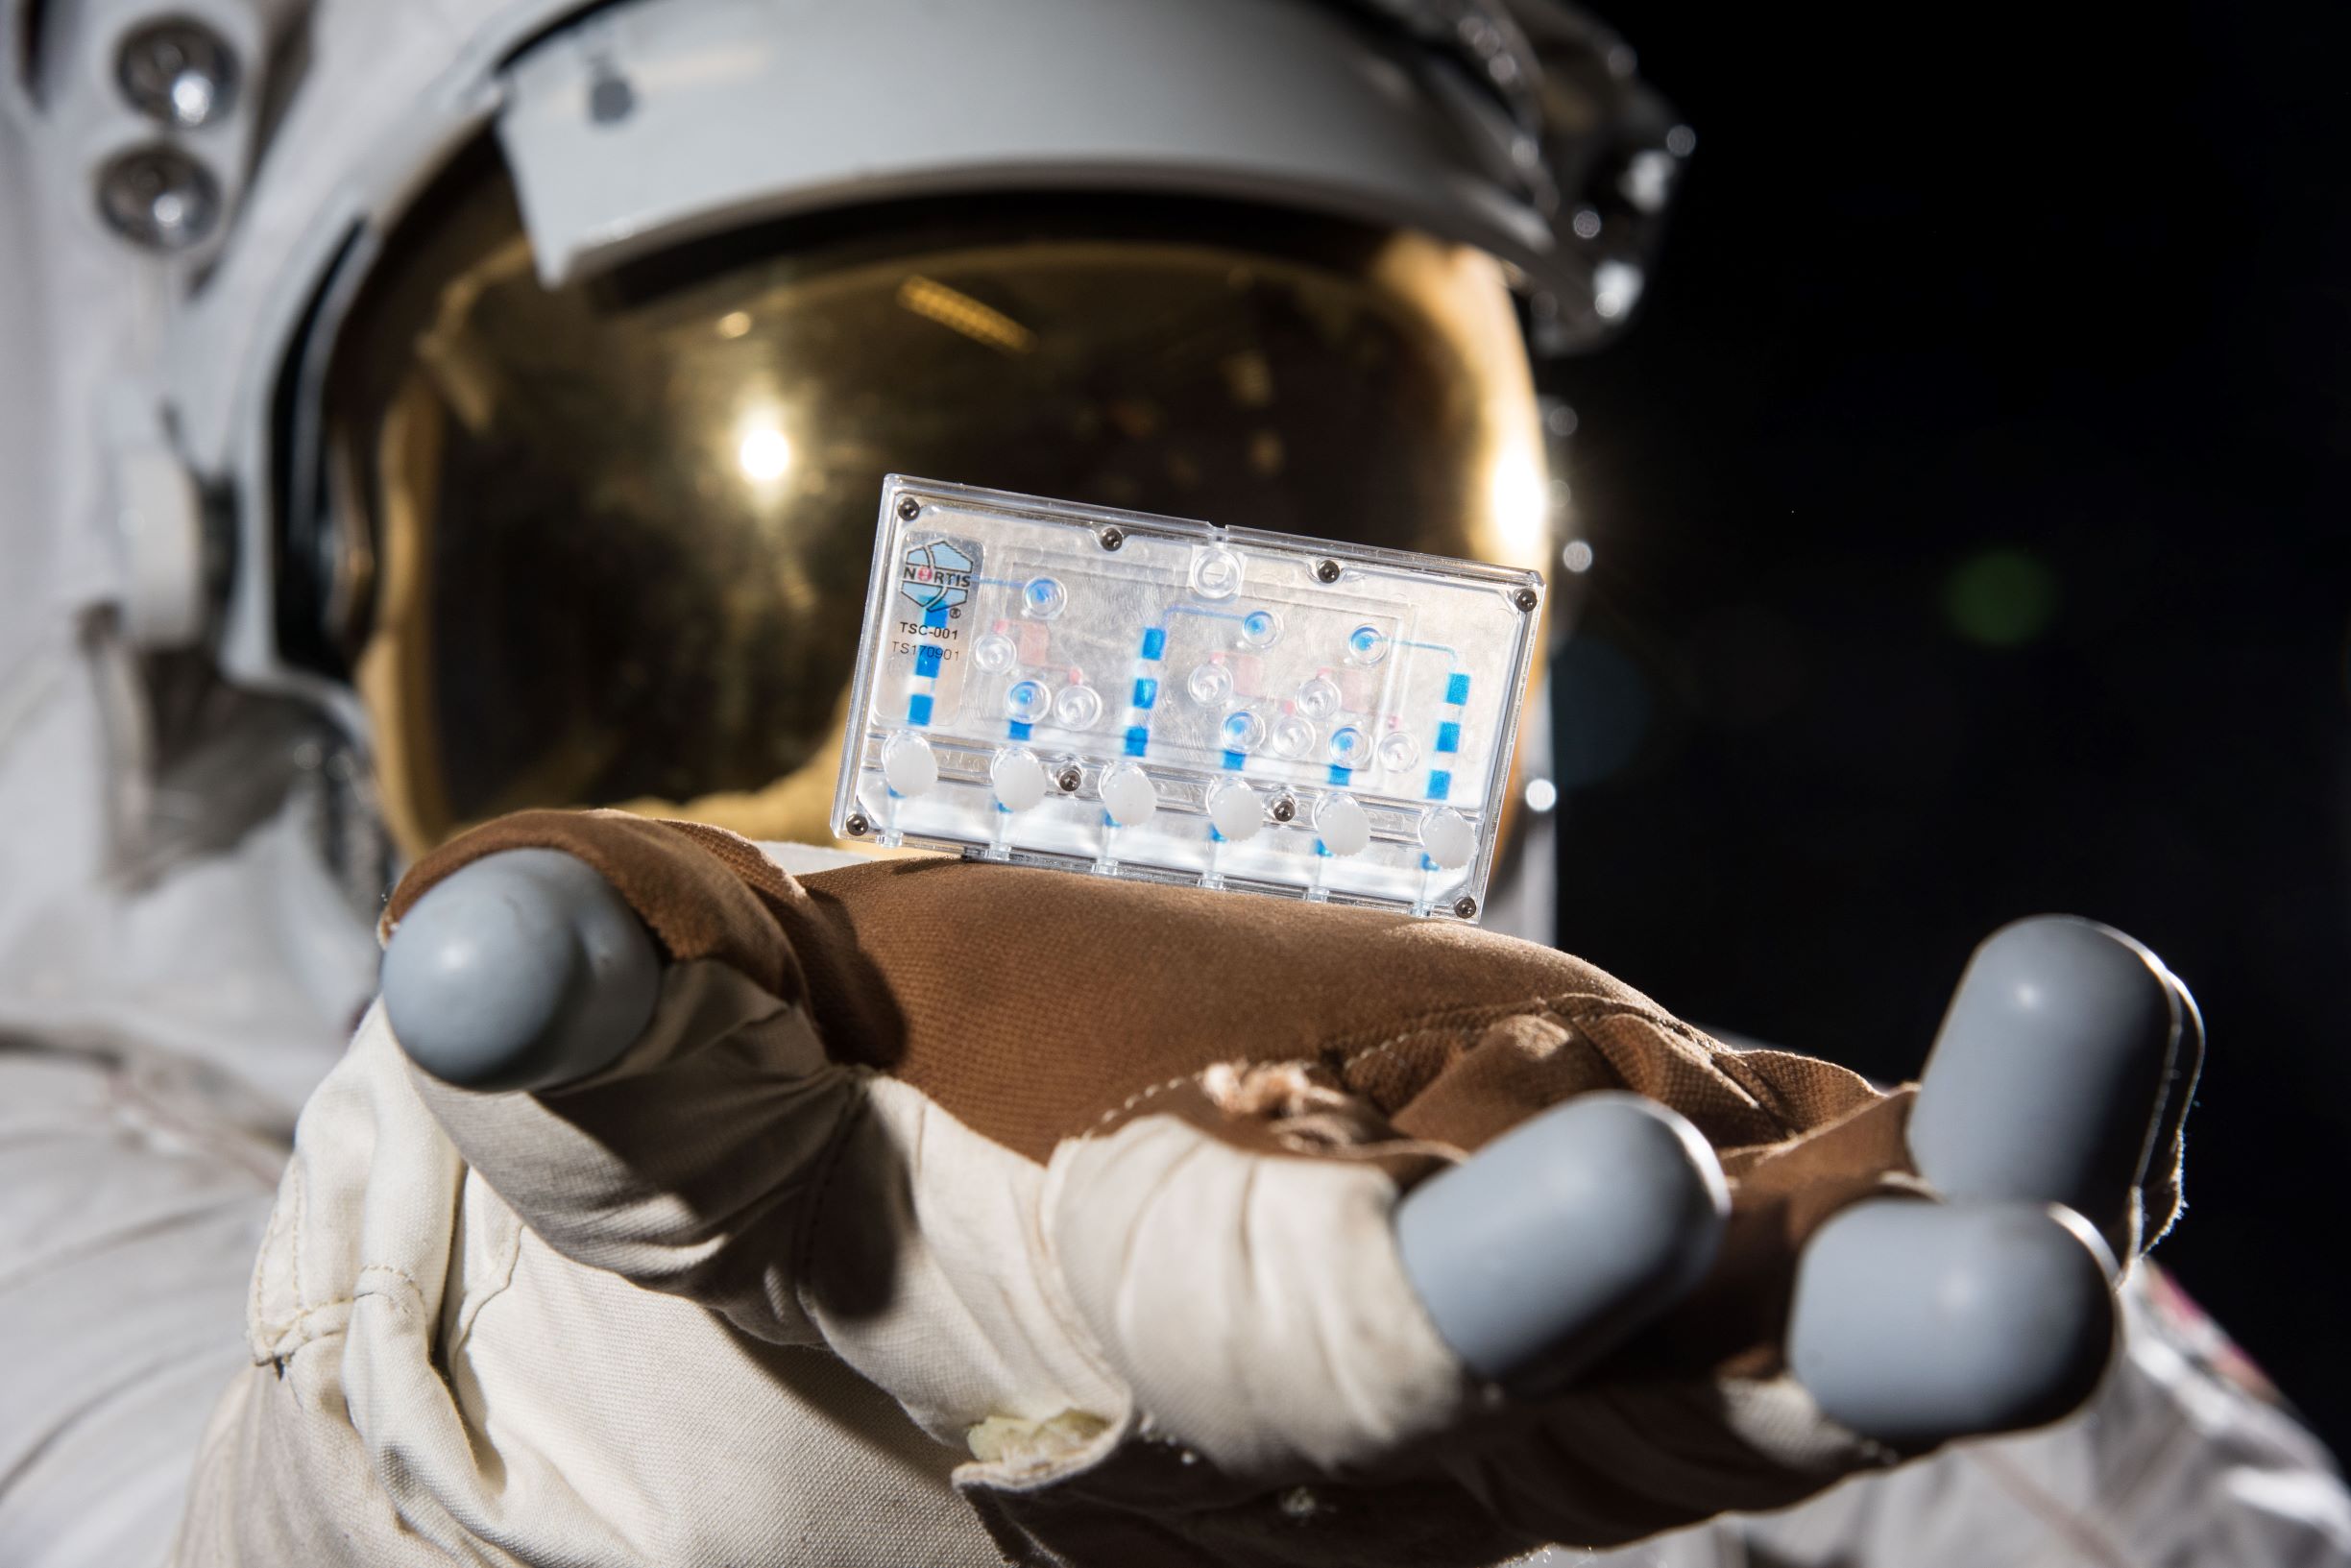 A NASA spacesuit is shown with a kidney tissue chip in hand.